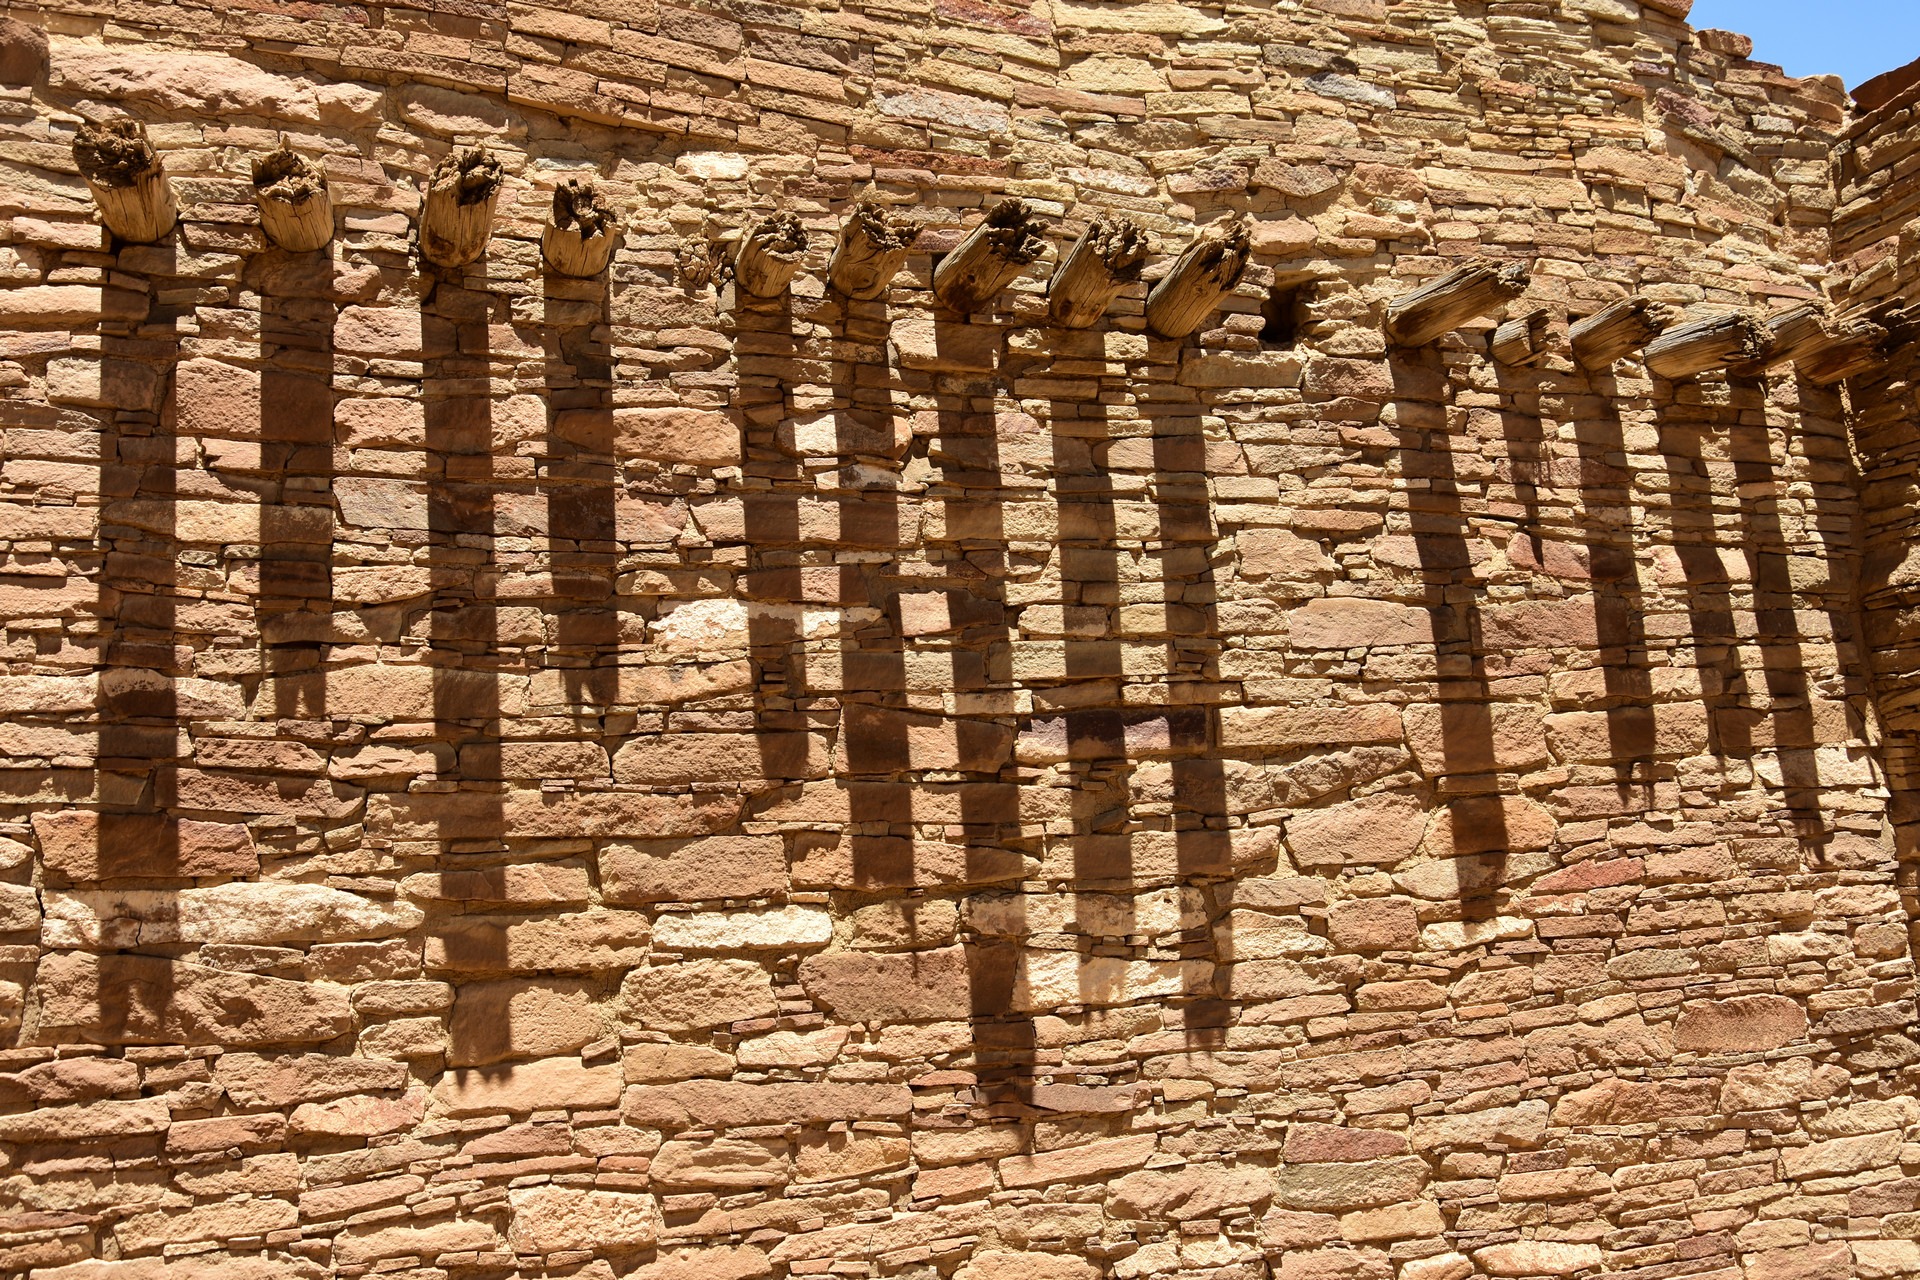 Chaco Cultures National Historical Park